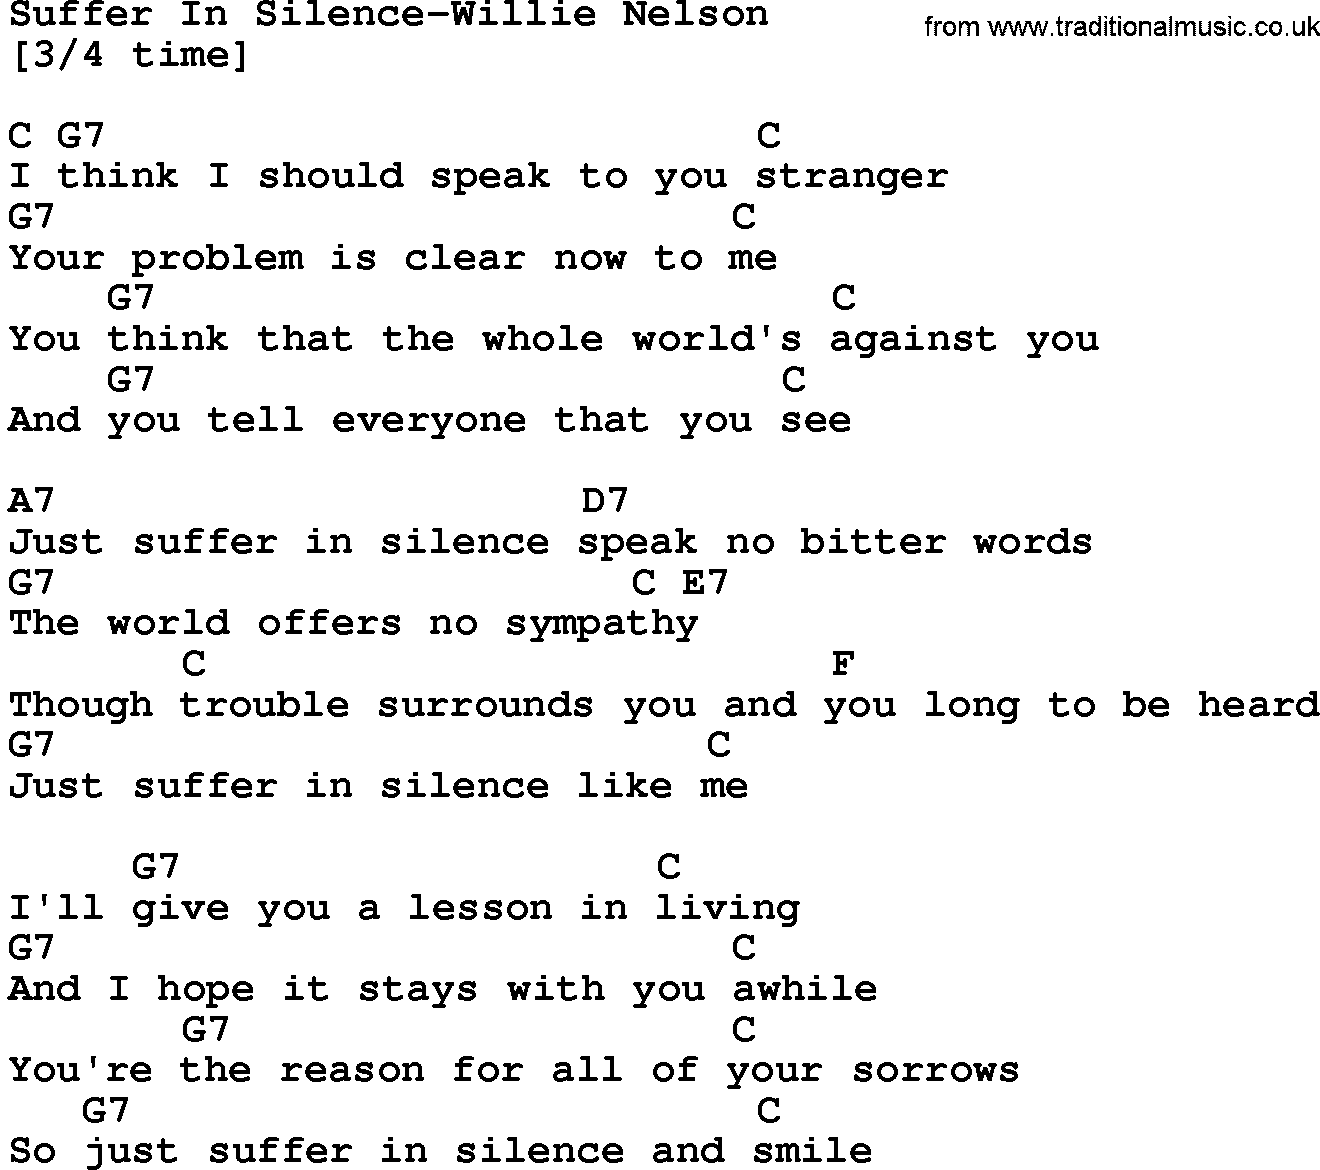 Country music song: Suffer In Silence-Willie Nelson lyrics and chords